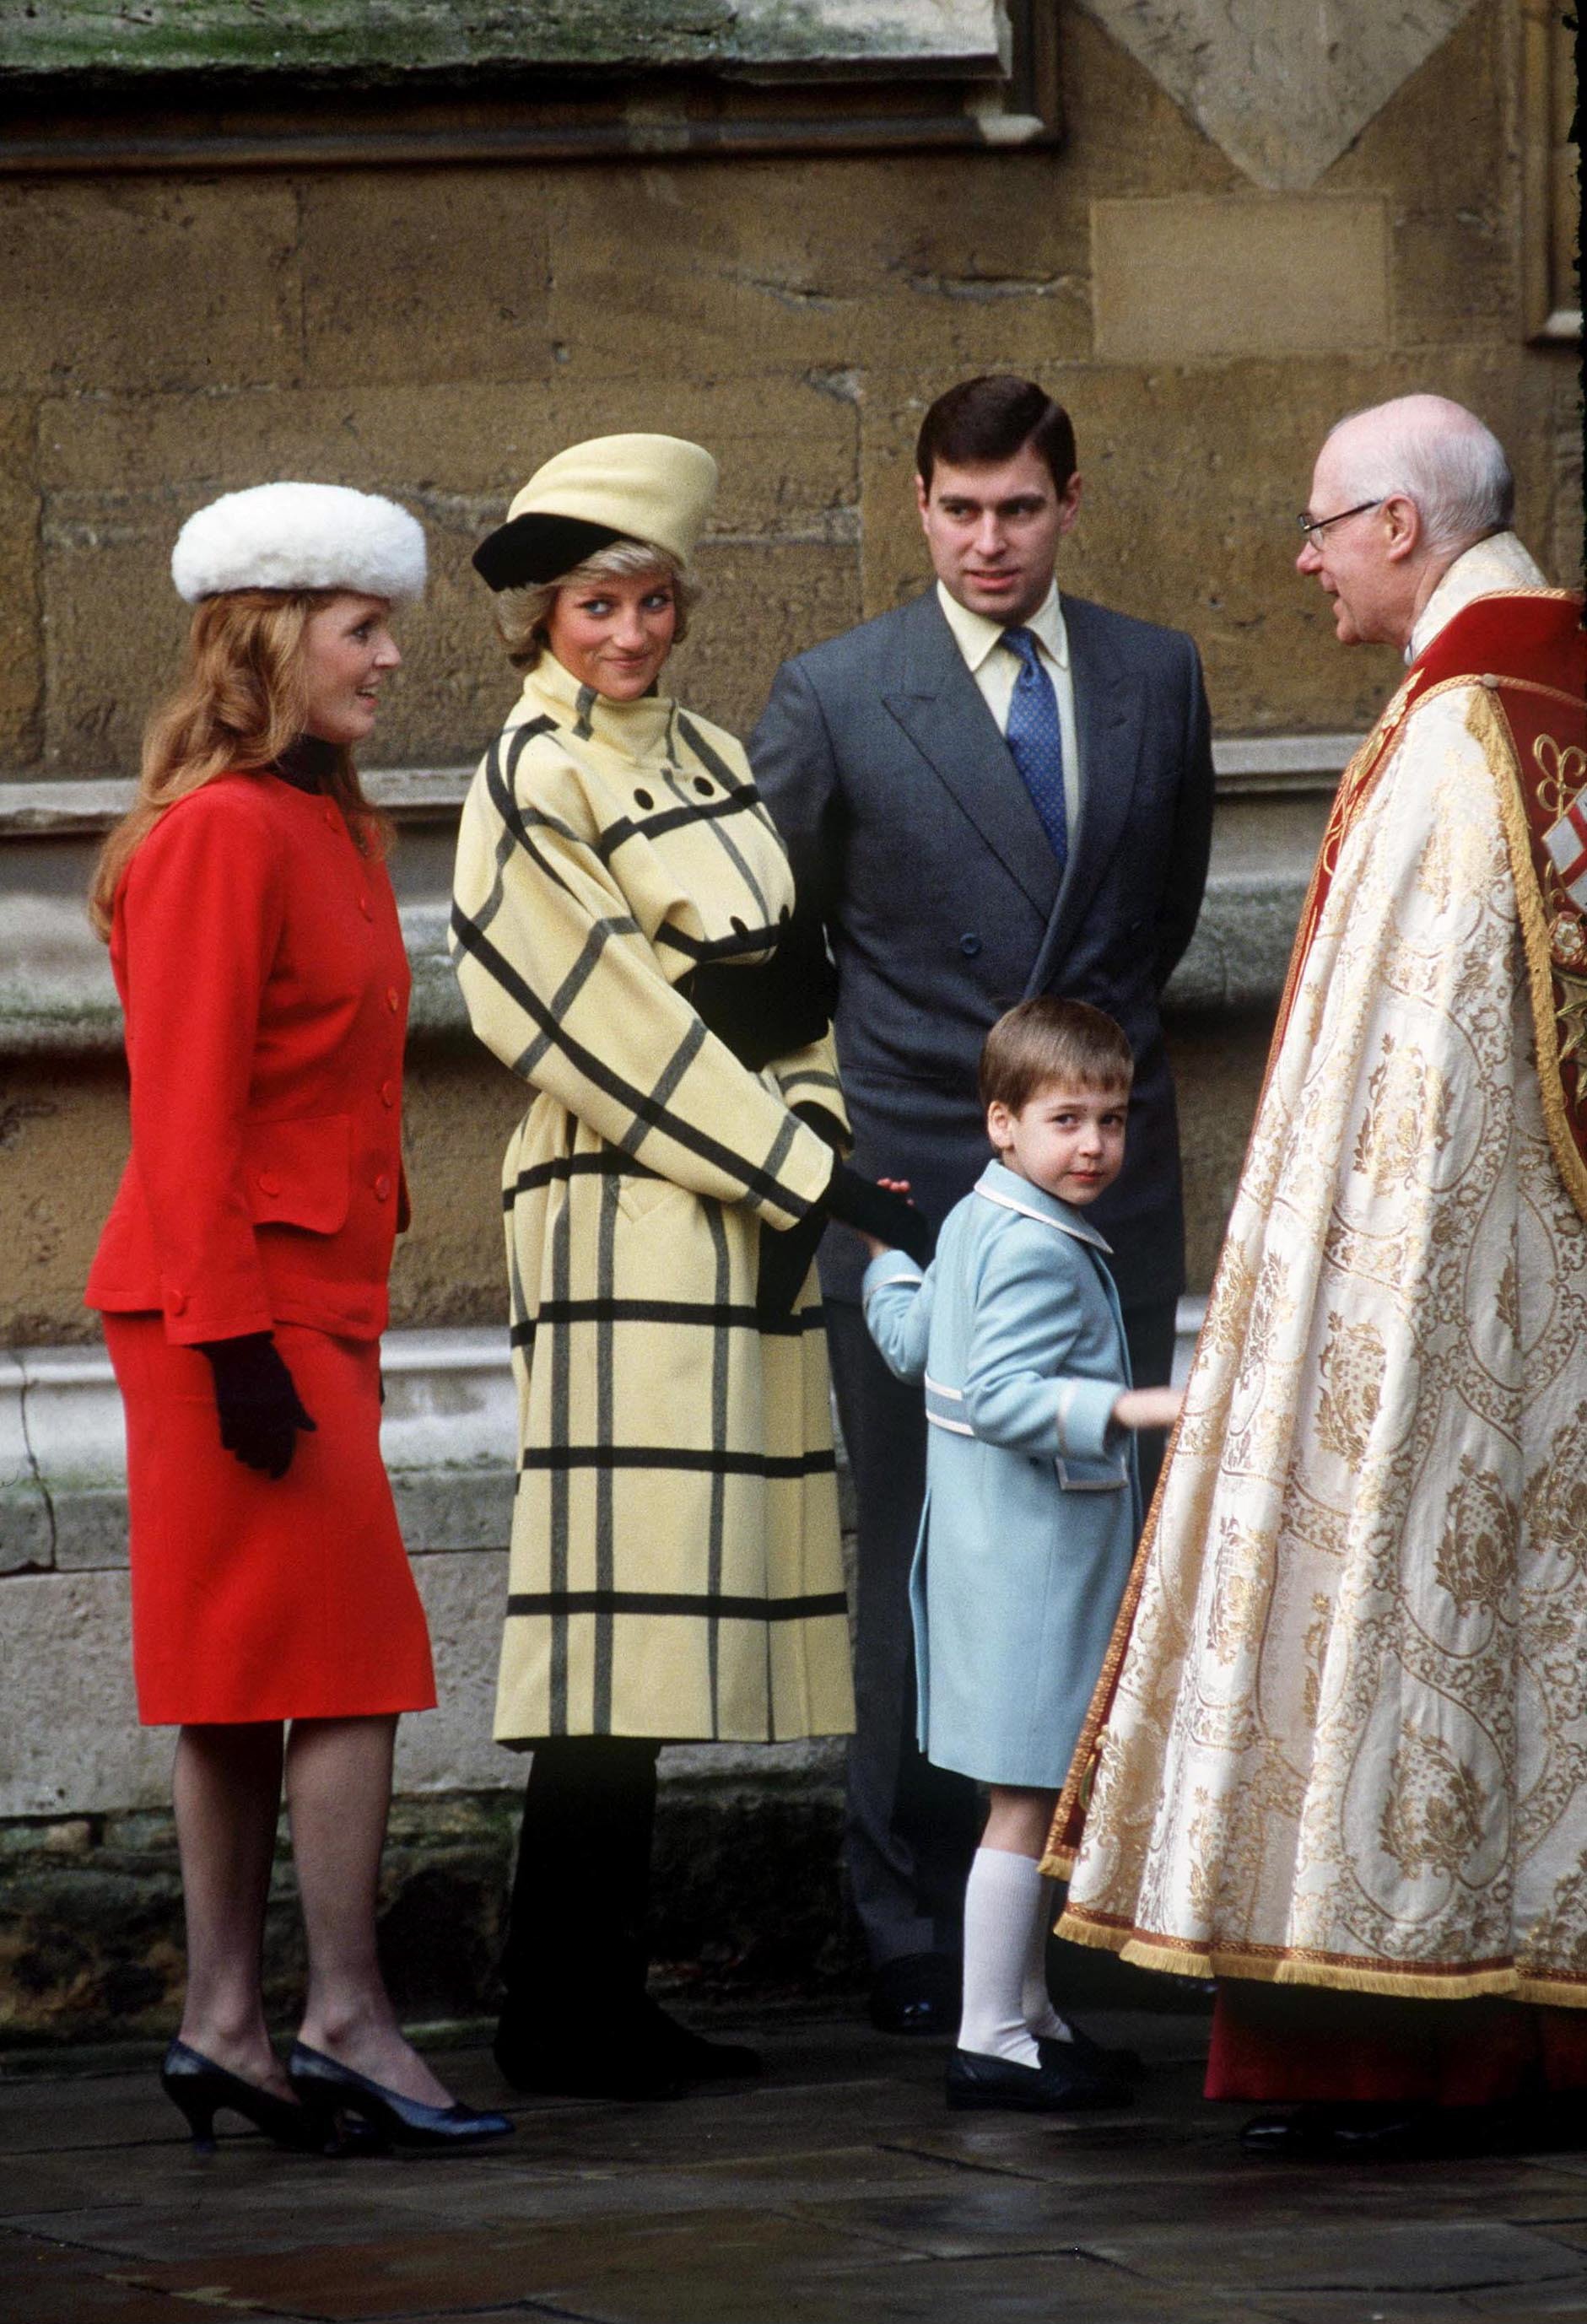 Princess Diana, Prince William, Prince Andrew and Sarah, the Duchess of York photographed in Windsor. / Source: Getty Images